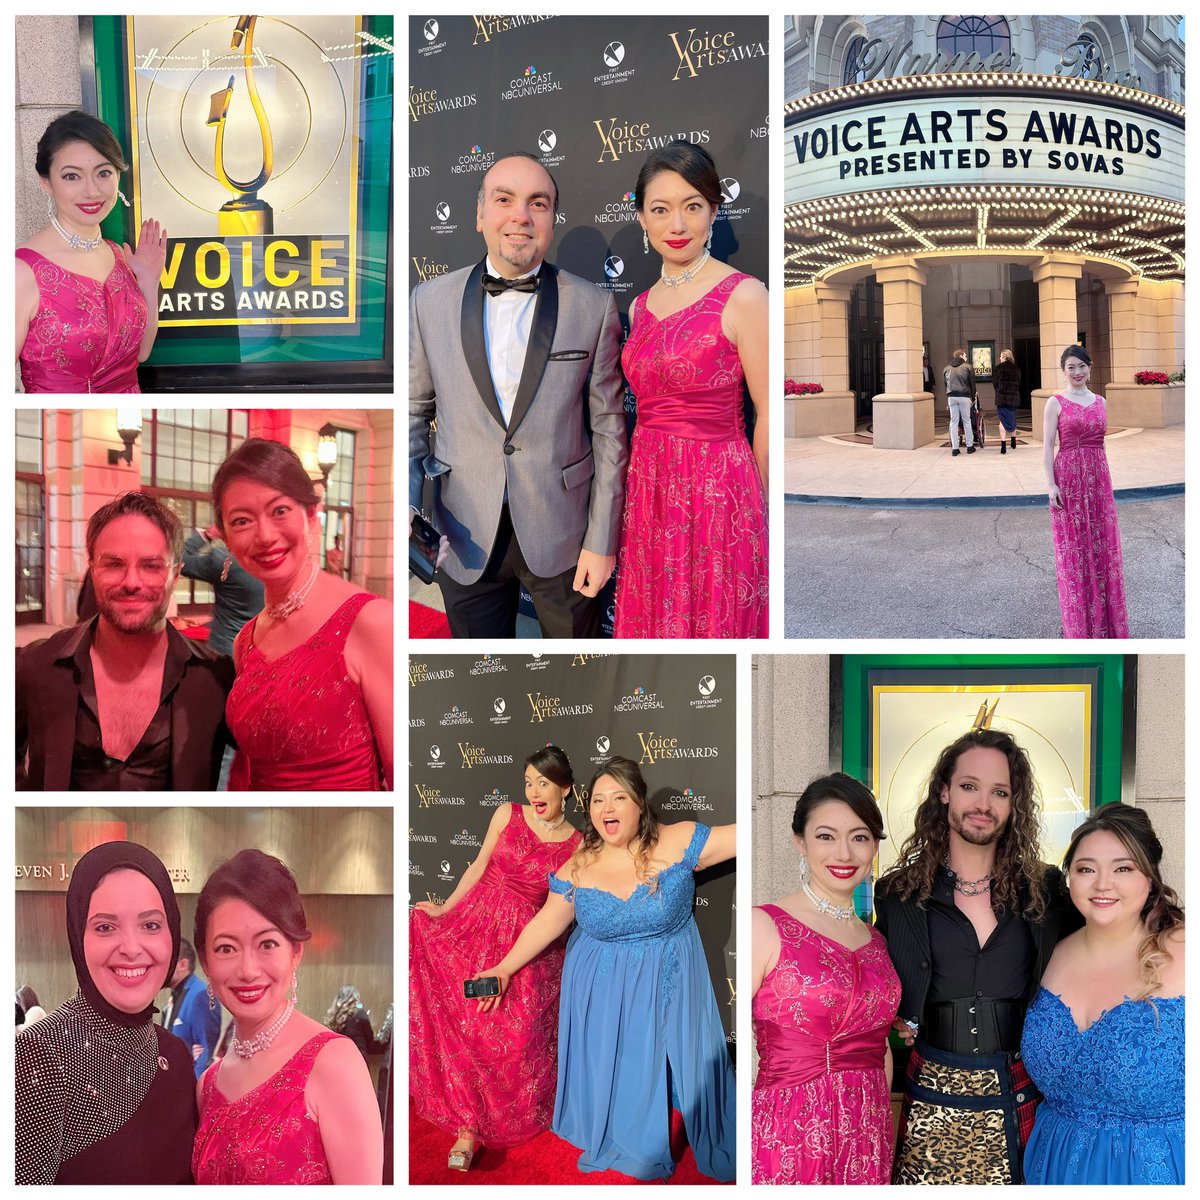 Last Sunday I had a super great time at @SovasVoice Voice Arts Awards, meeting so many amazing voiceover artists around the world! I didn't win but I am so honored to be nominated. Thank you @Joanthevoice and @rgaskins1 for this wonderful opportunity. #SOVAS #voiceartsawards